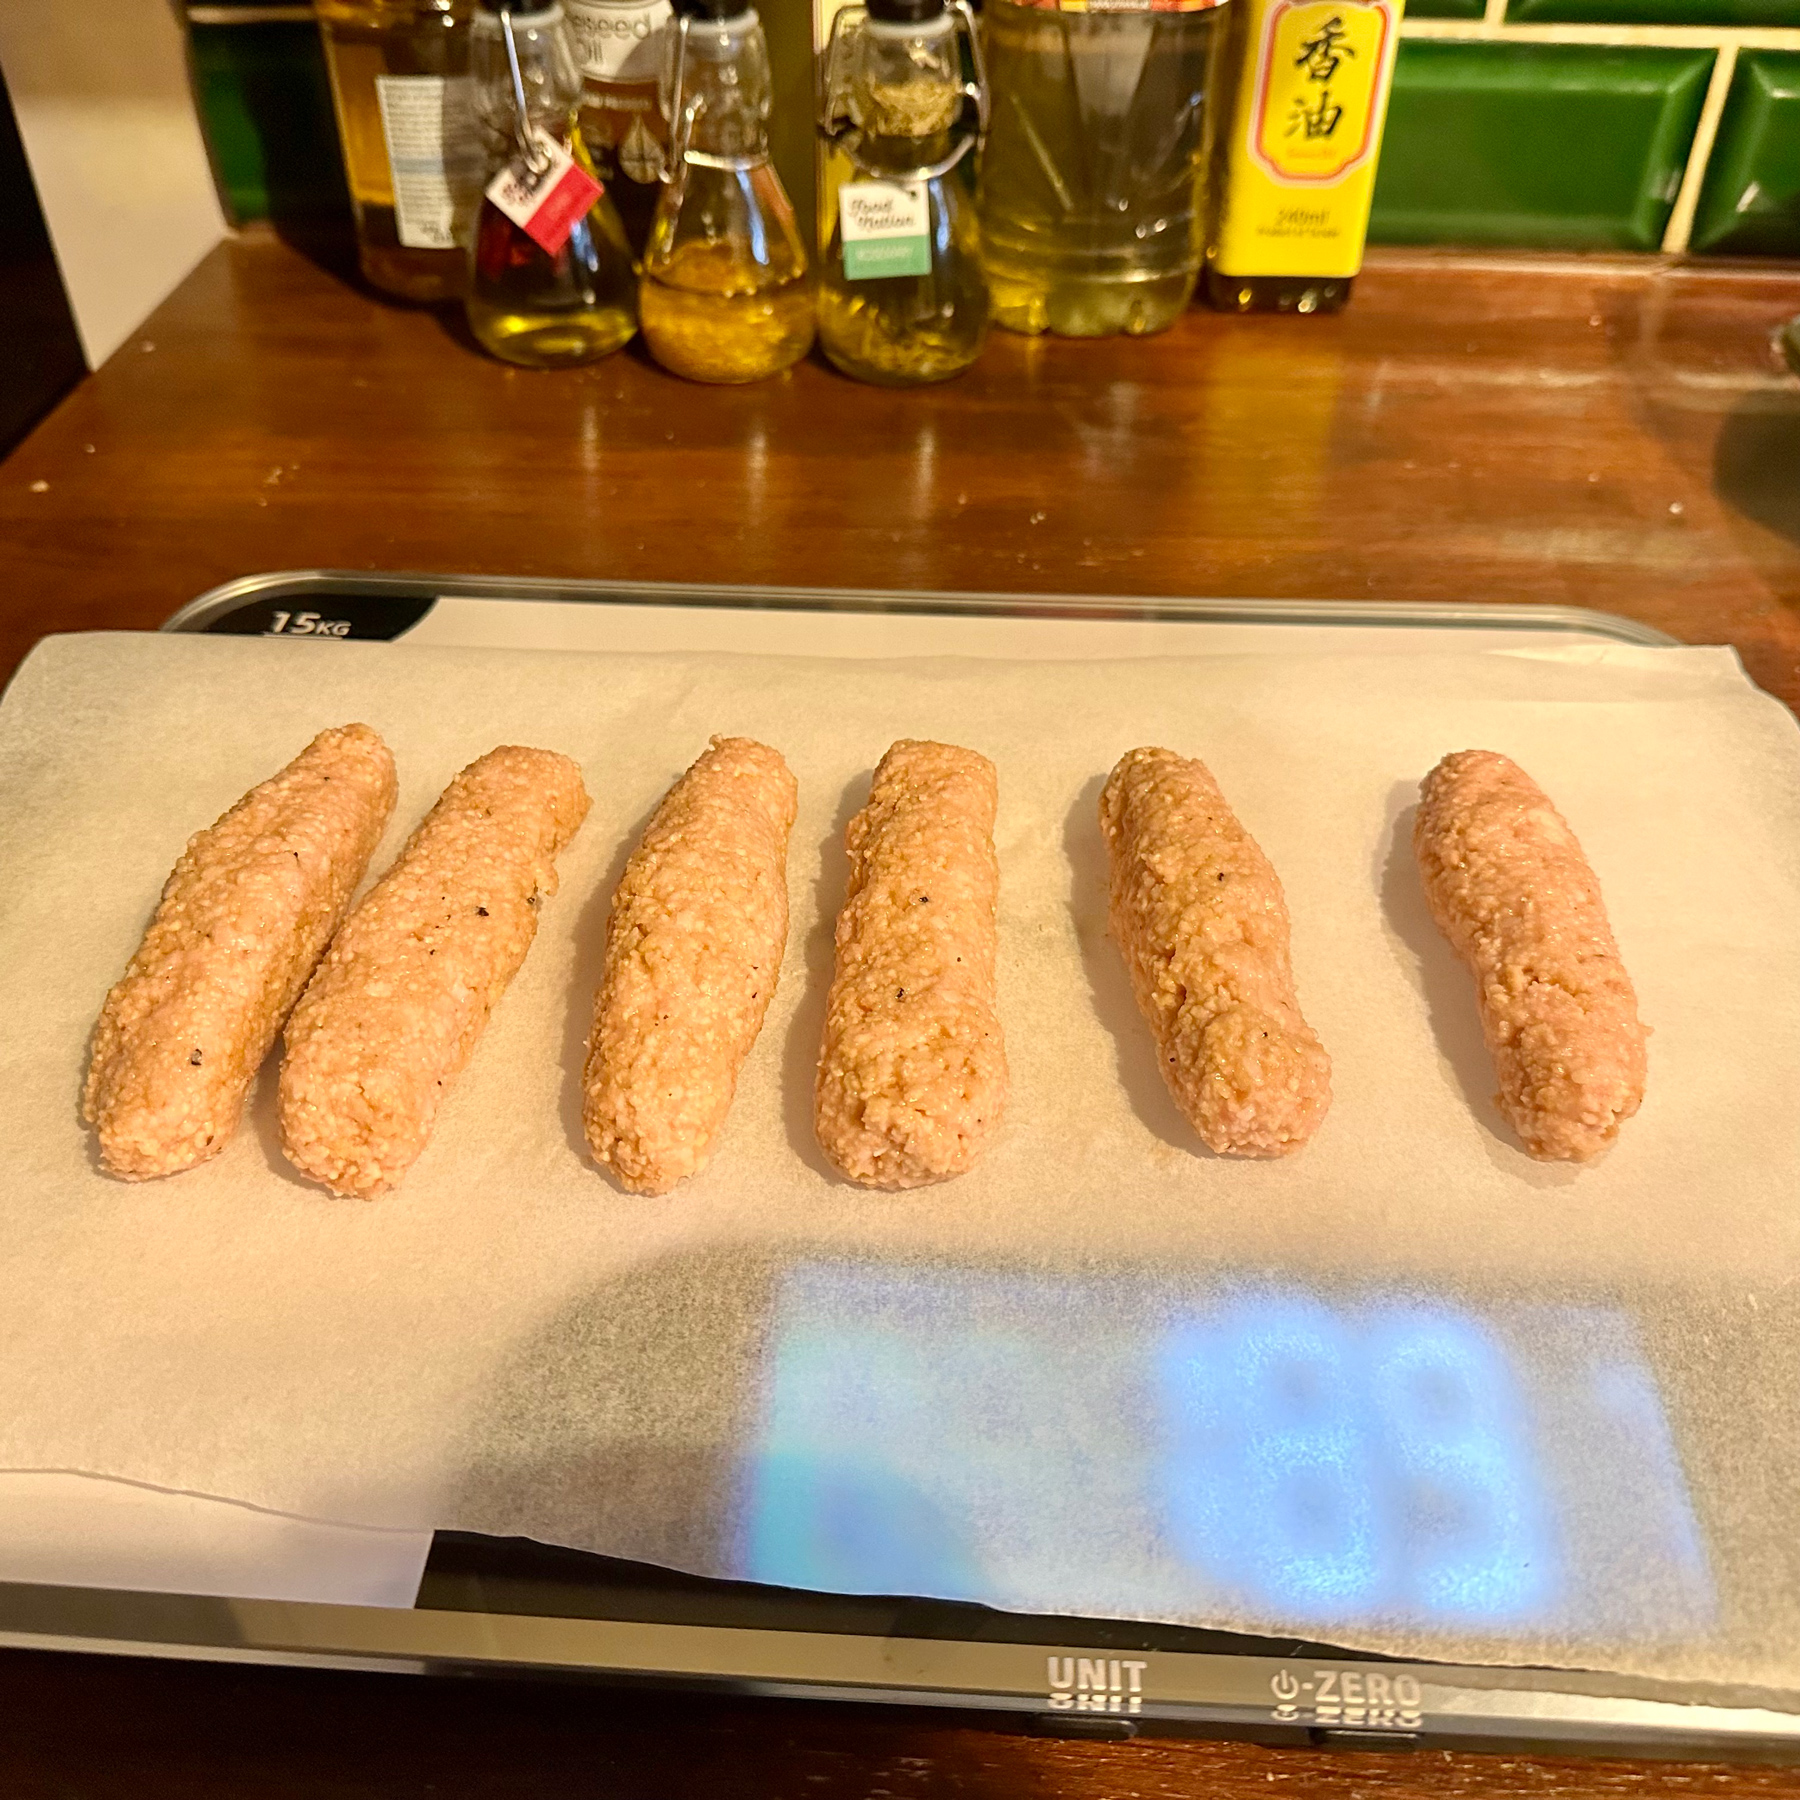 Six pink and grainy vegan sausages which have been roughly shaped from Sosmix